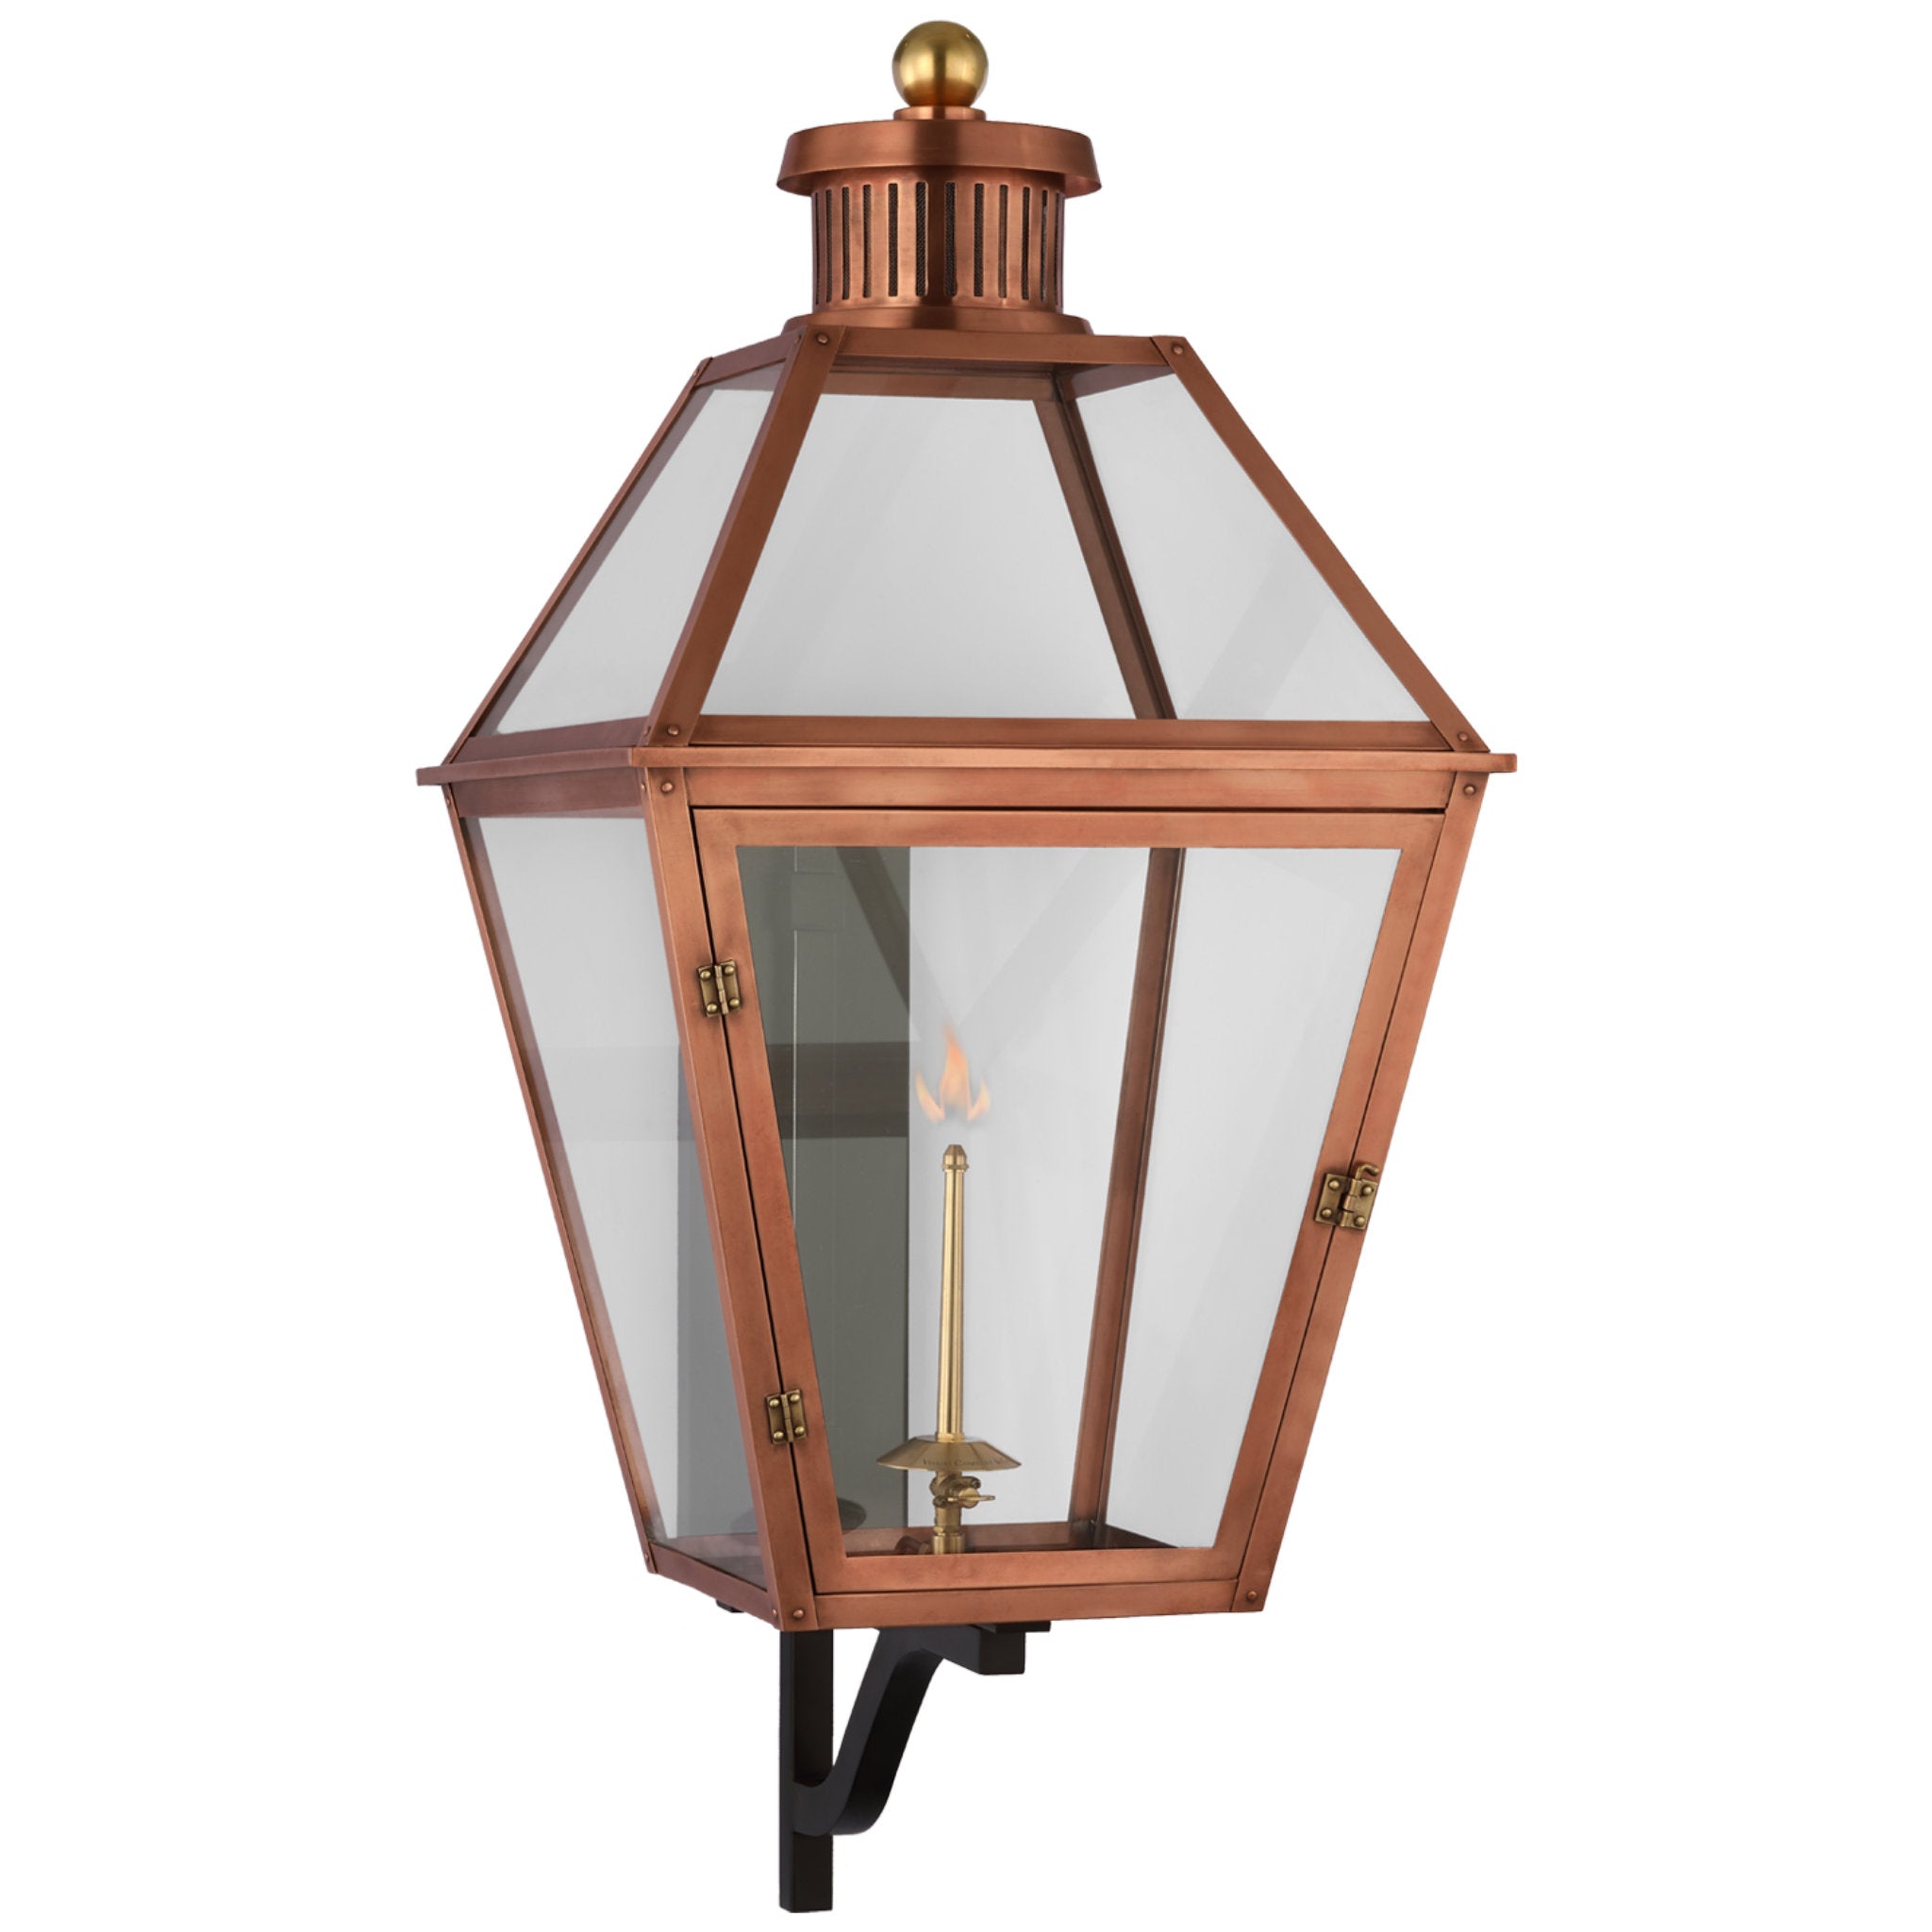 Chapman & Myers Stratford XL Bracketed Gas Wall Lantern in Soft Copper with Clear Glass